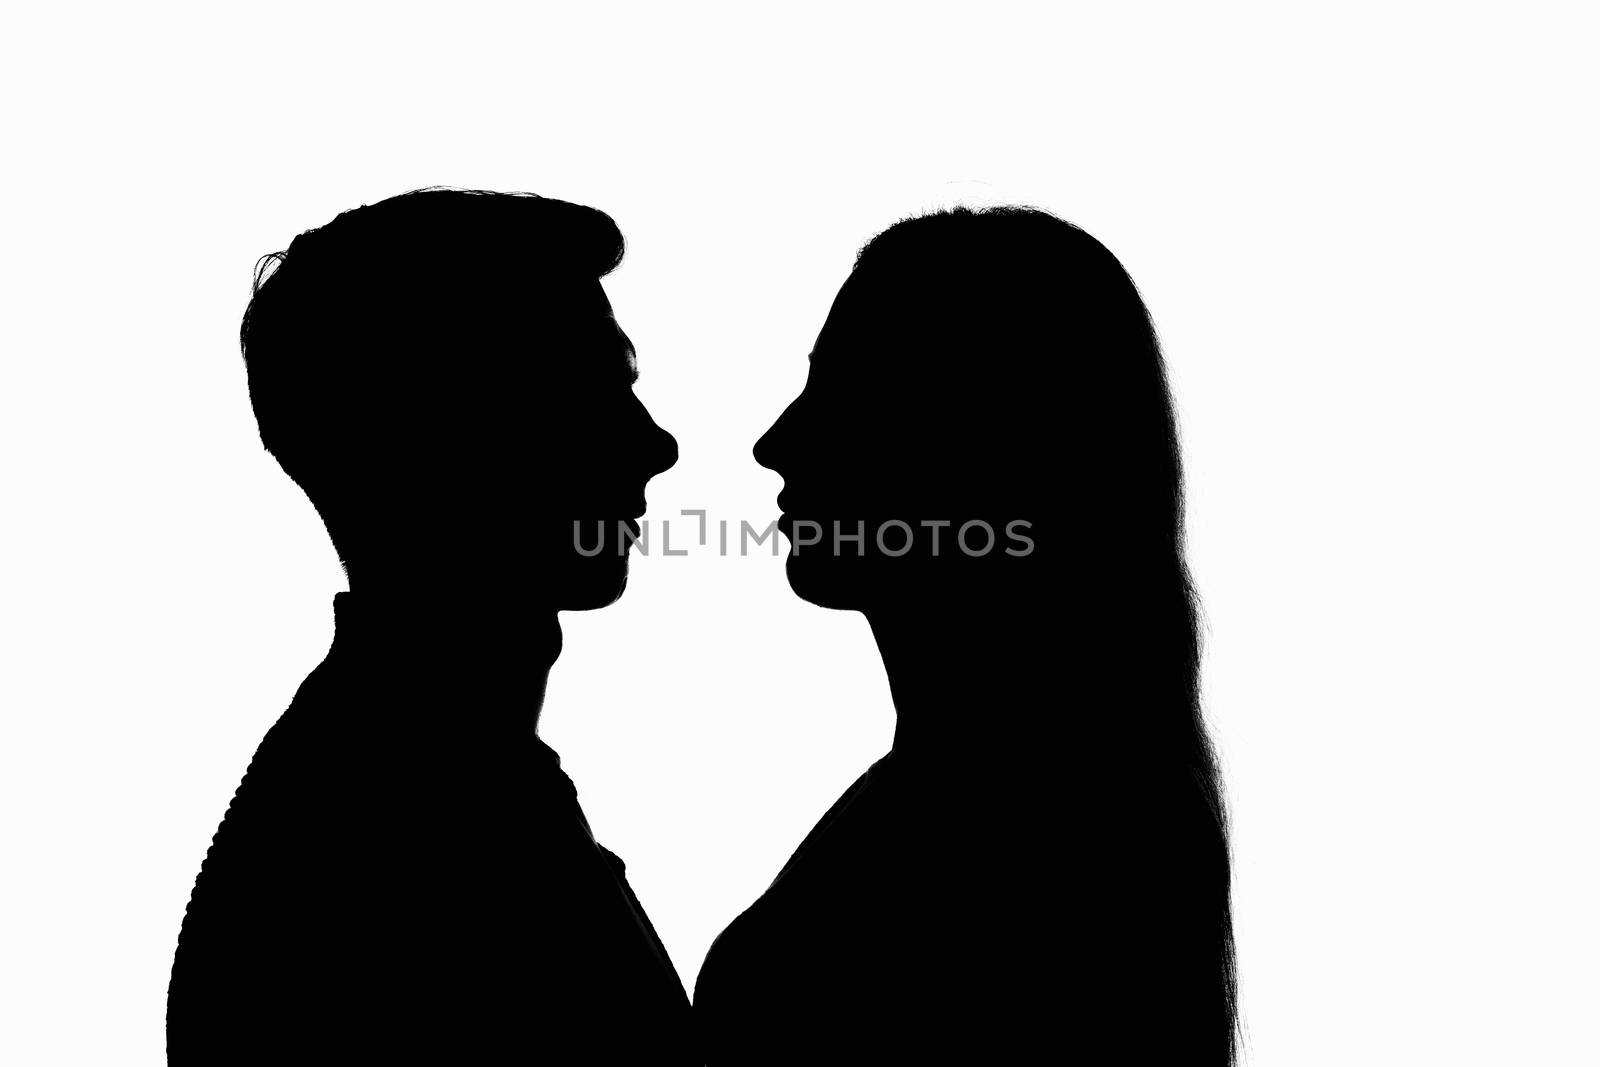 Images of two people right in front of each other by Madhourse